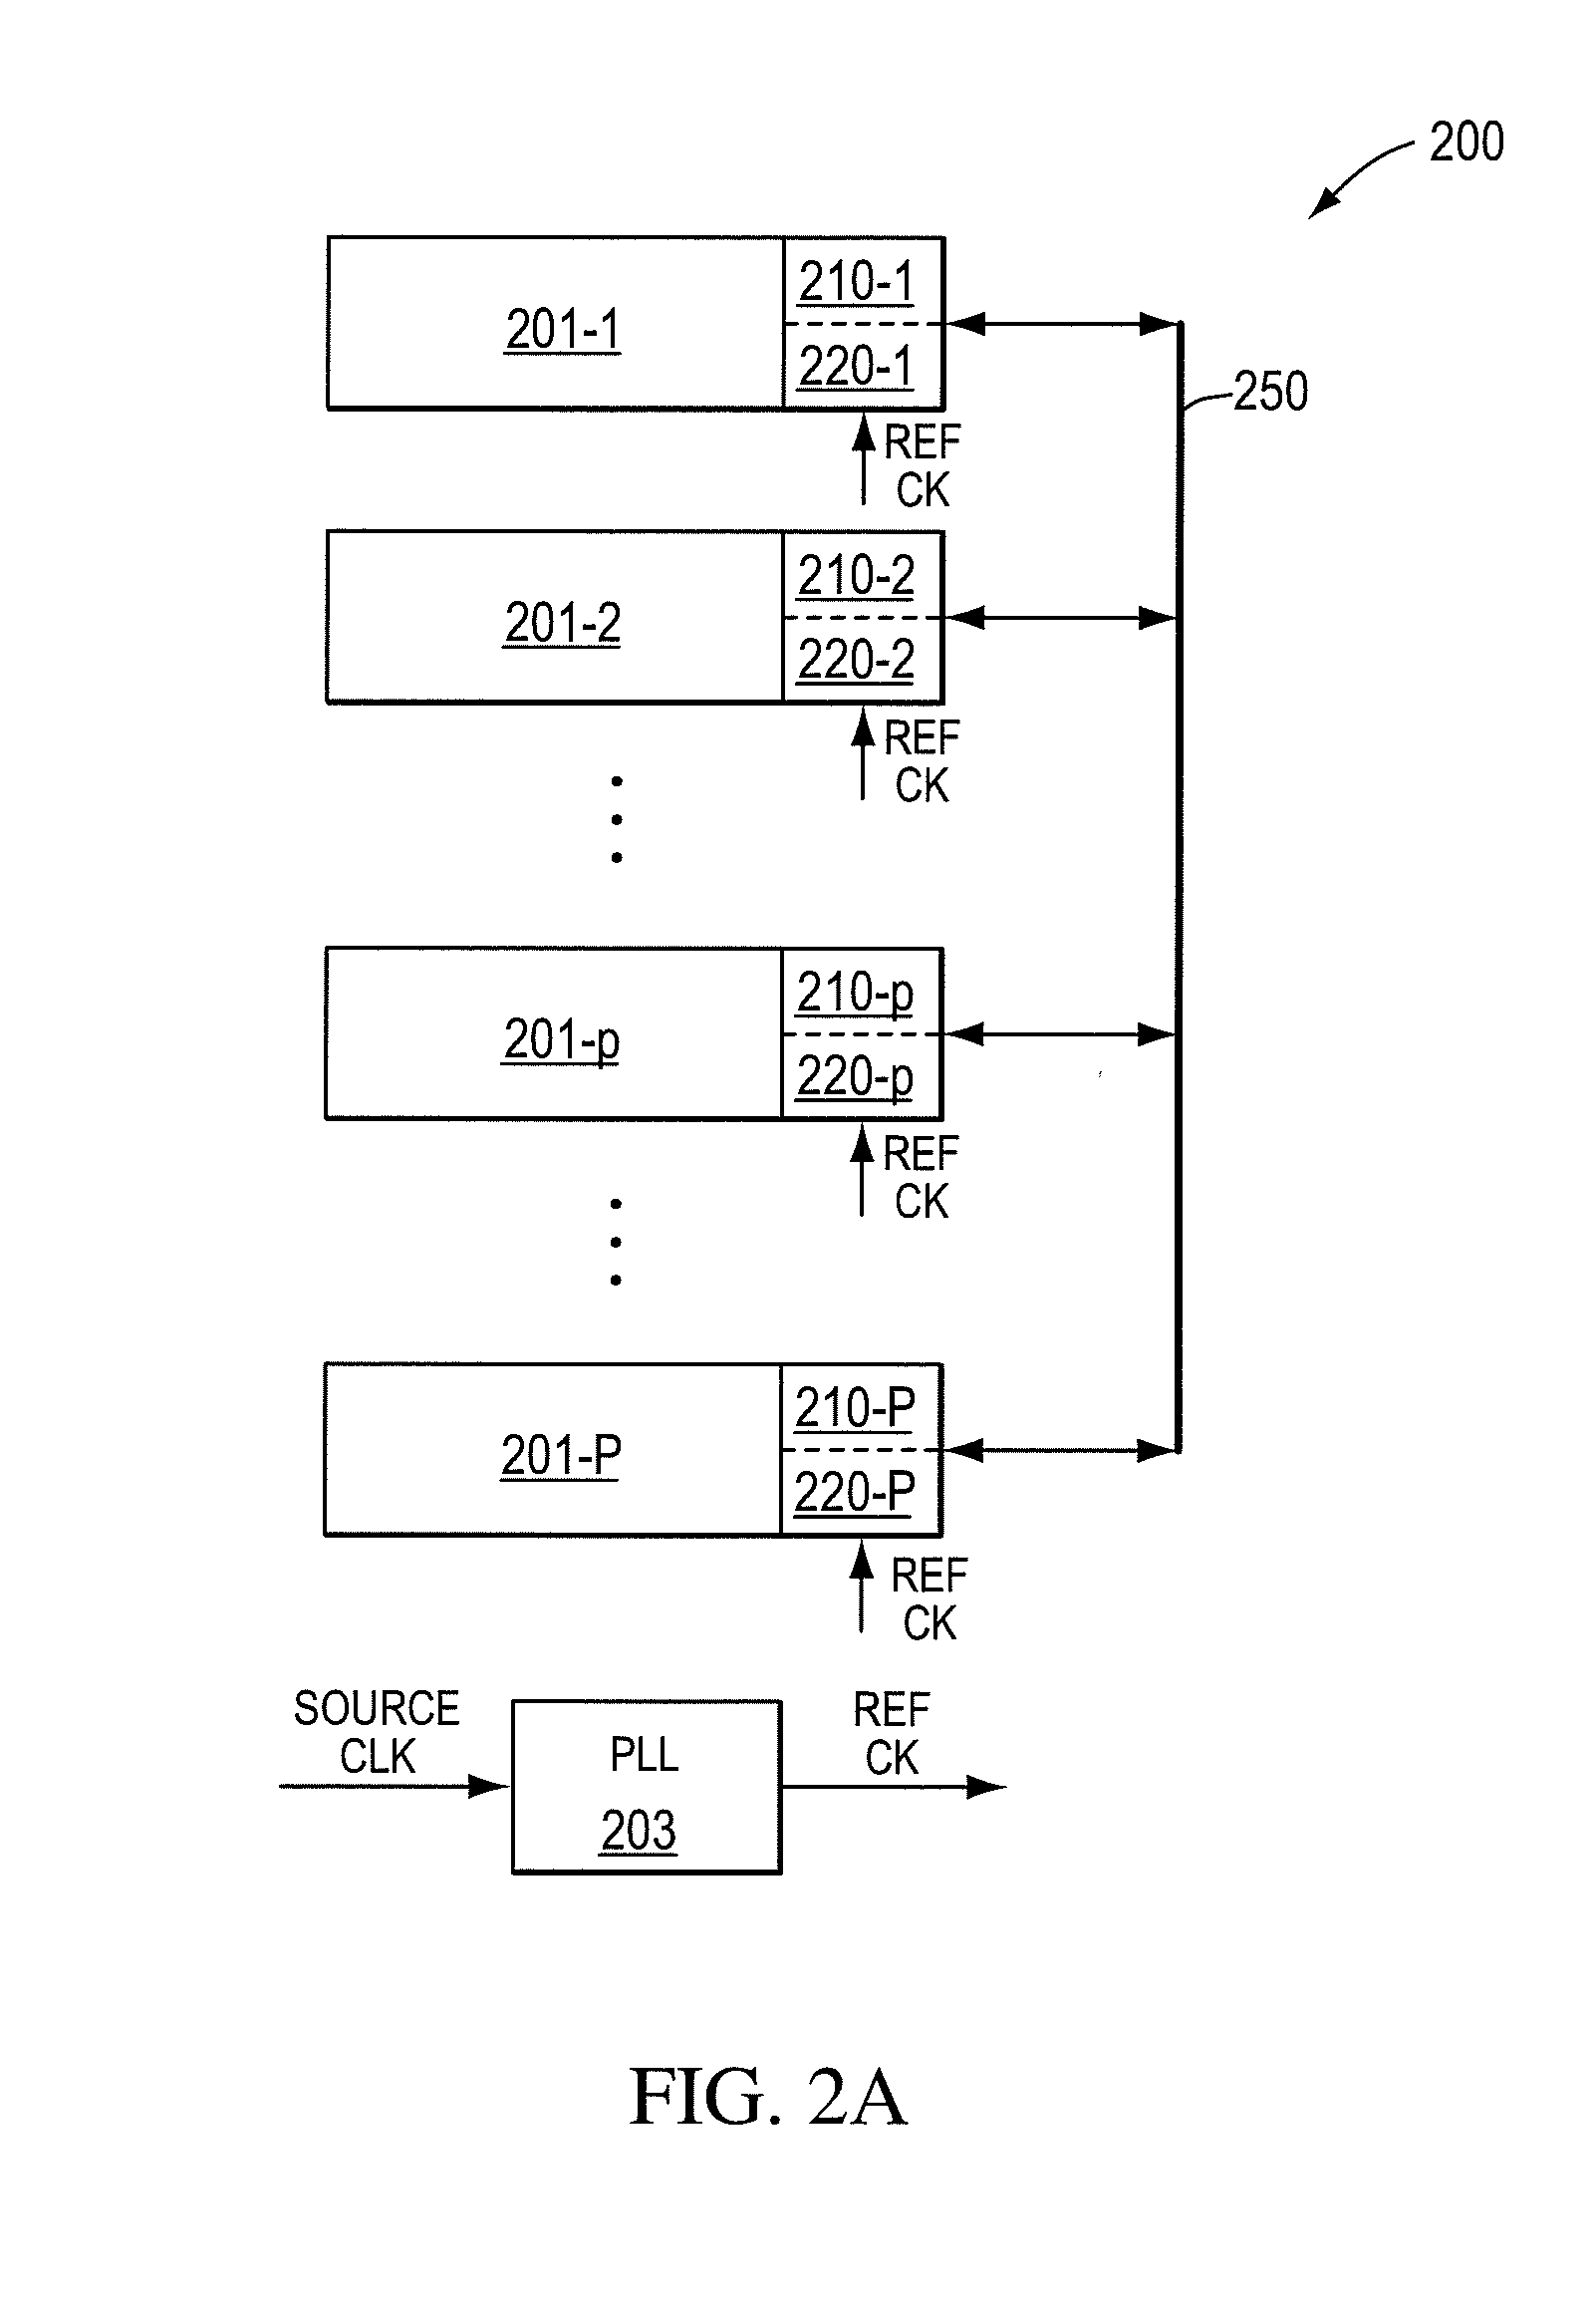 Multi-channel communications transceiver